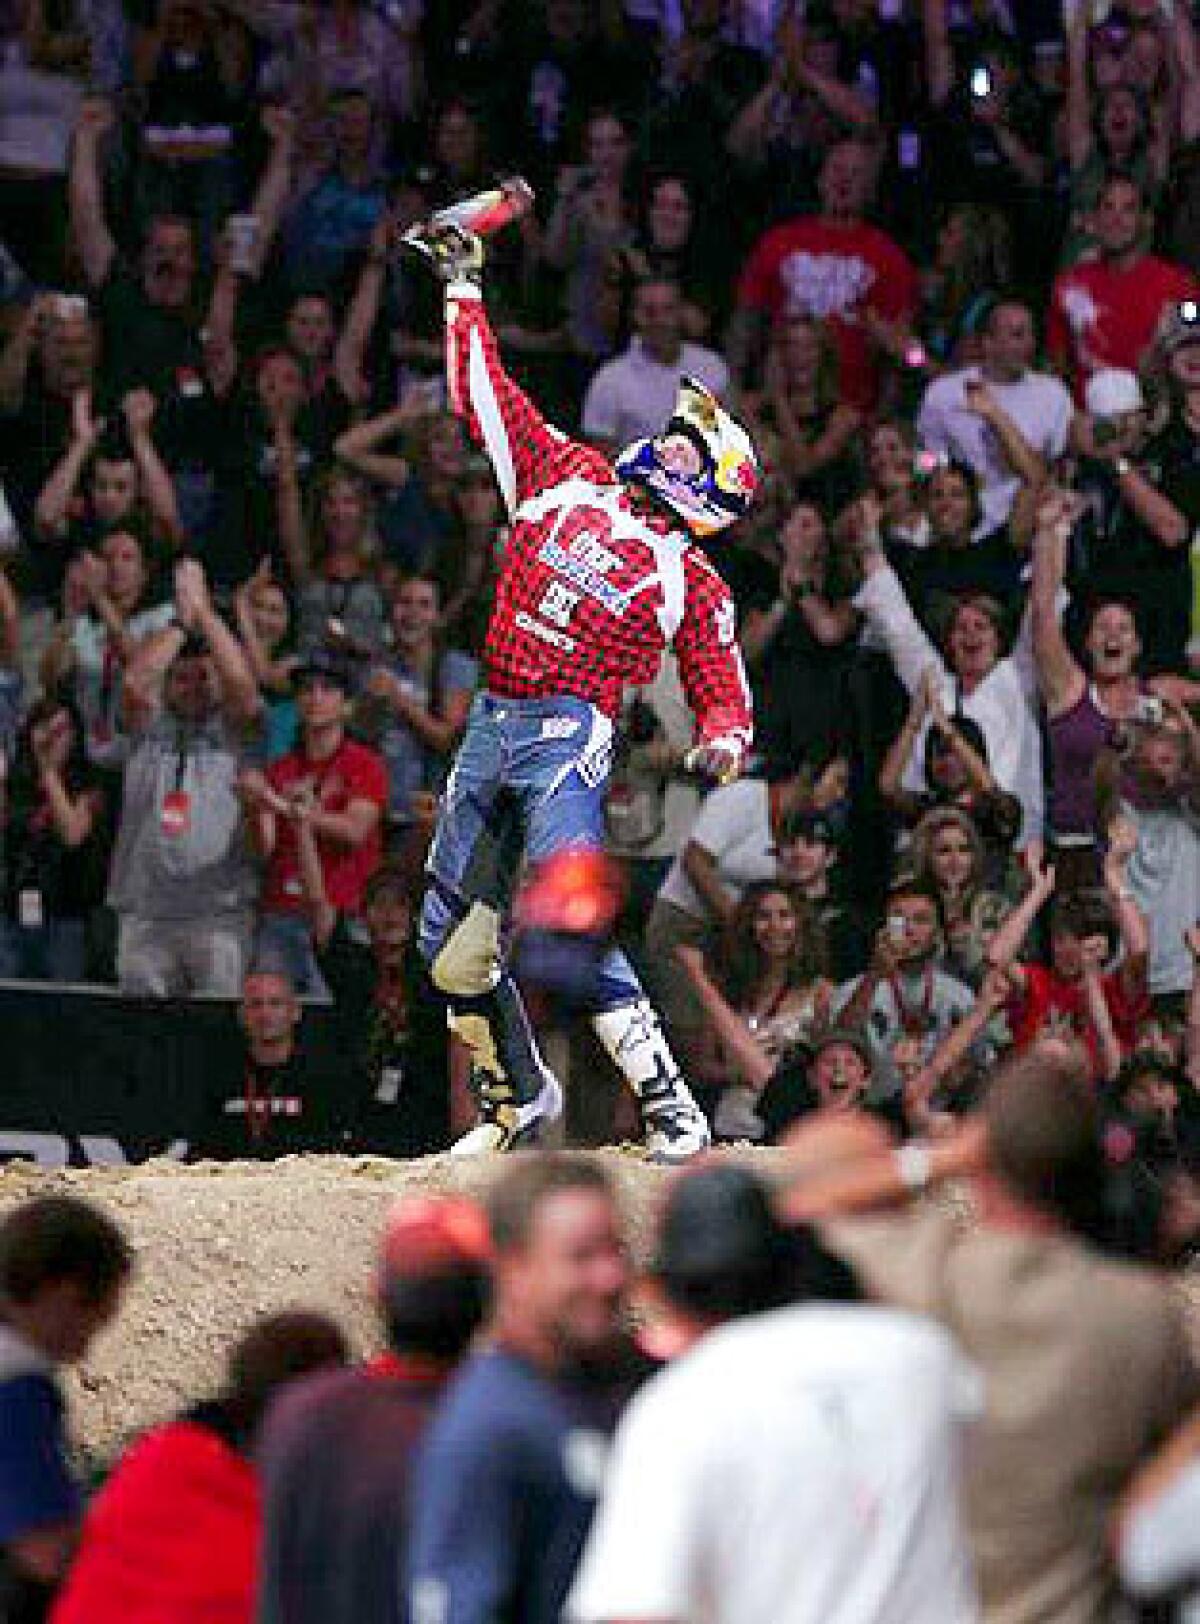 Travis Pastrana celebrates along with the crowd at Staples Center after executing a double back flip during the Moto X best trick final of X Games 12.